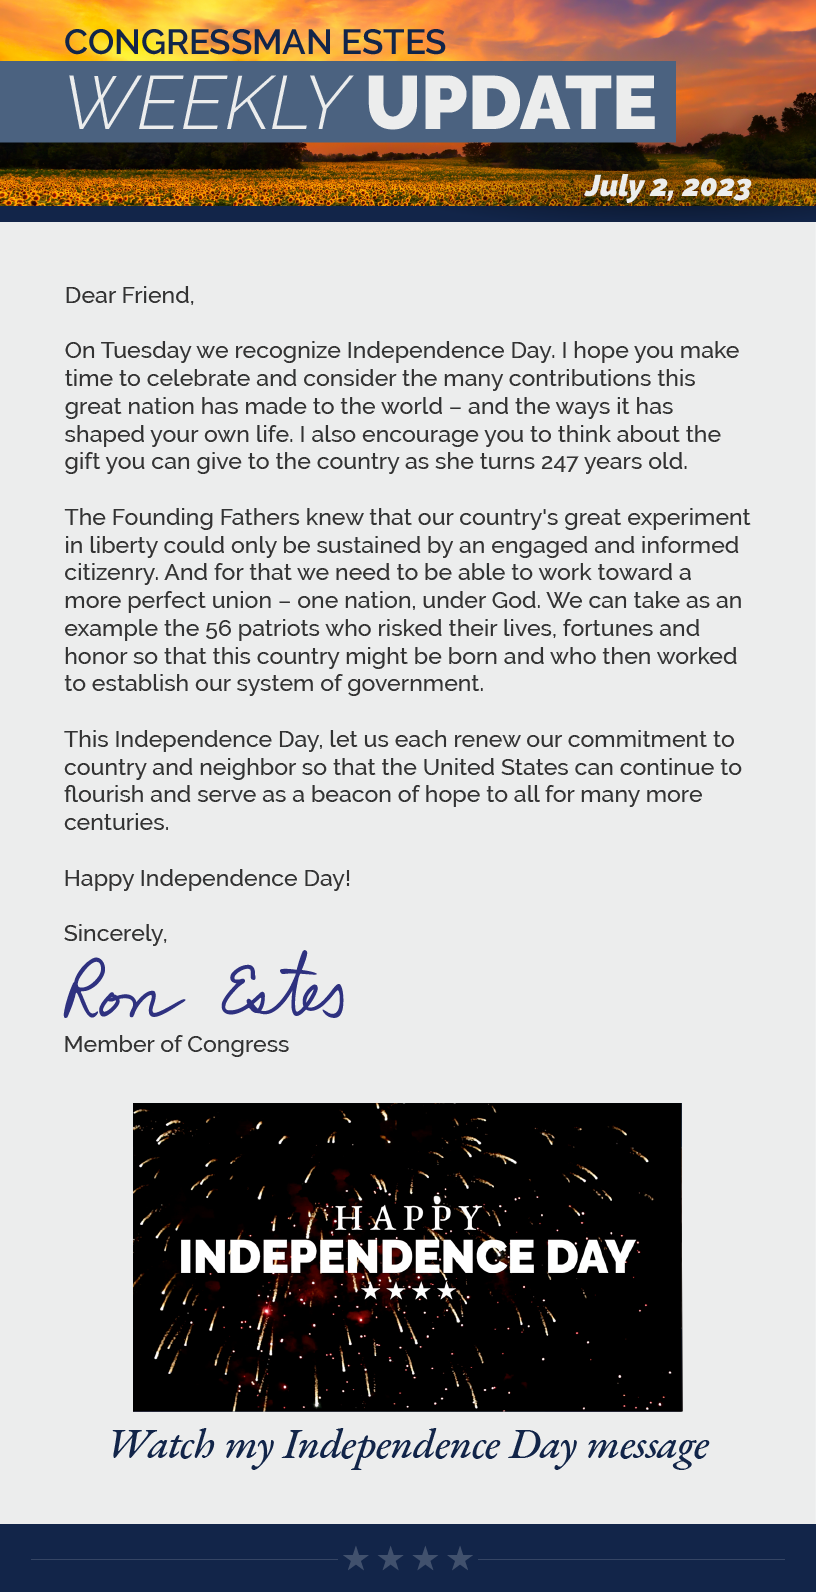 Dear Friend,  On Tuesday we recognize Independence Day. I hope you make time to celebrate and consider the many contributions this great nation has made to the world – and the ways it has shaped your own life. I also encourage you to think about the gift you can give to the country as she turns 247 years old.  The Founding Fathers knew that our country's great experiment in liberty could only be sustained by an engaged and informed citizenry. And for that we need to be able to work toward a more perfect union – one nation, under God. We can take as an example the 56 patriots who risked their lives, fortunes and honor so that this country might be born and who then worked to establish our system of government.  This Independence Day, let us each renew our commitment to country and neighbor so that the United States can continue to flourish and serve as a beacon of hope to all for many more centuries.  Happy Independence Day!  Sincerely, Ron Estes